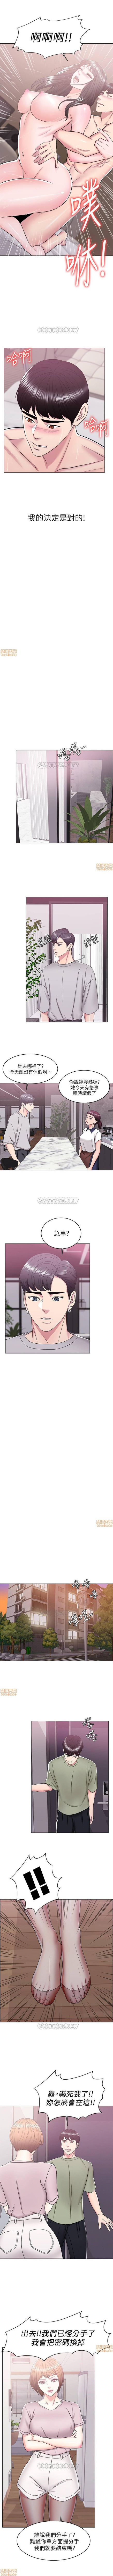 Swimpool | 濕身游泳課 | IS IT OKAY TO GET WET? Ch. 13 [Chinese] Raw 6